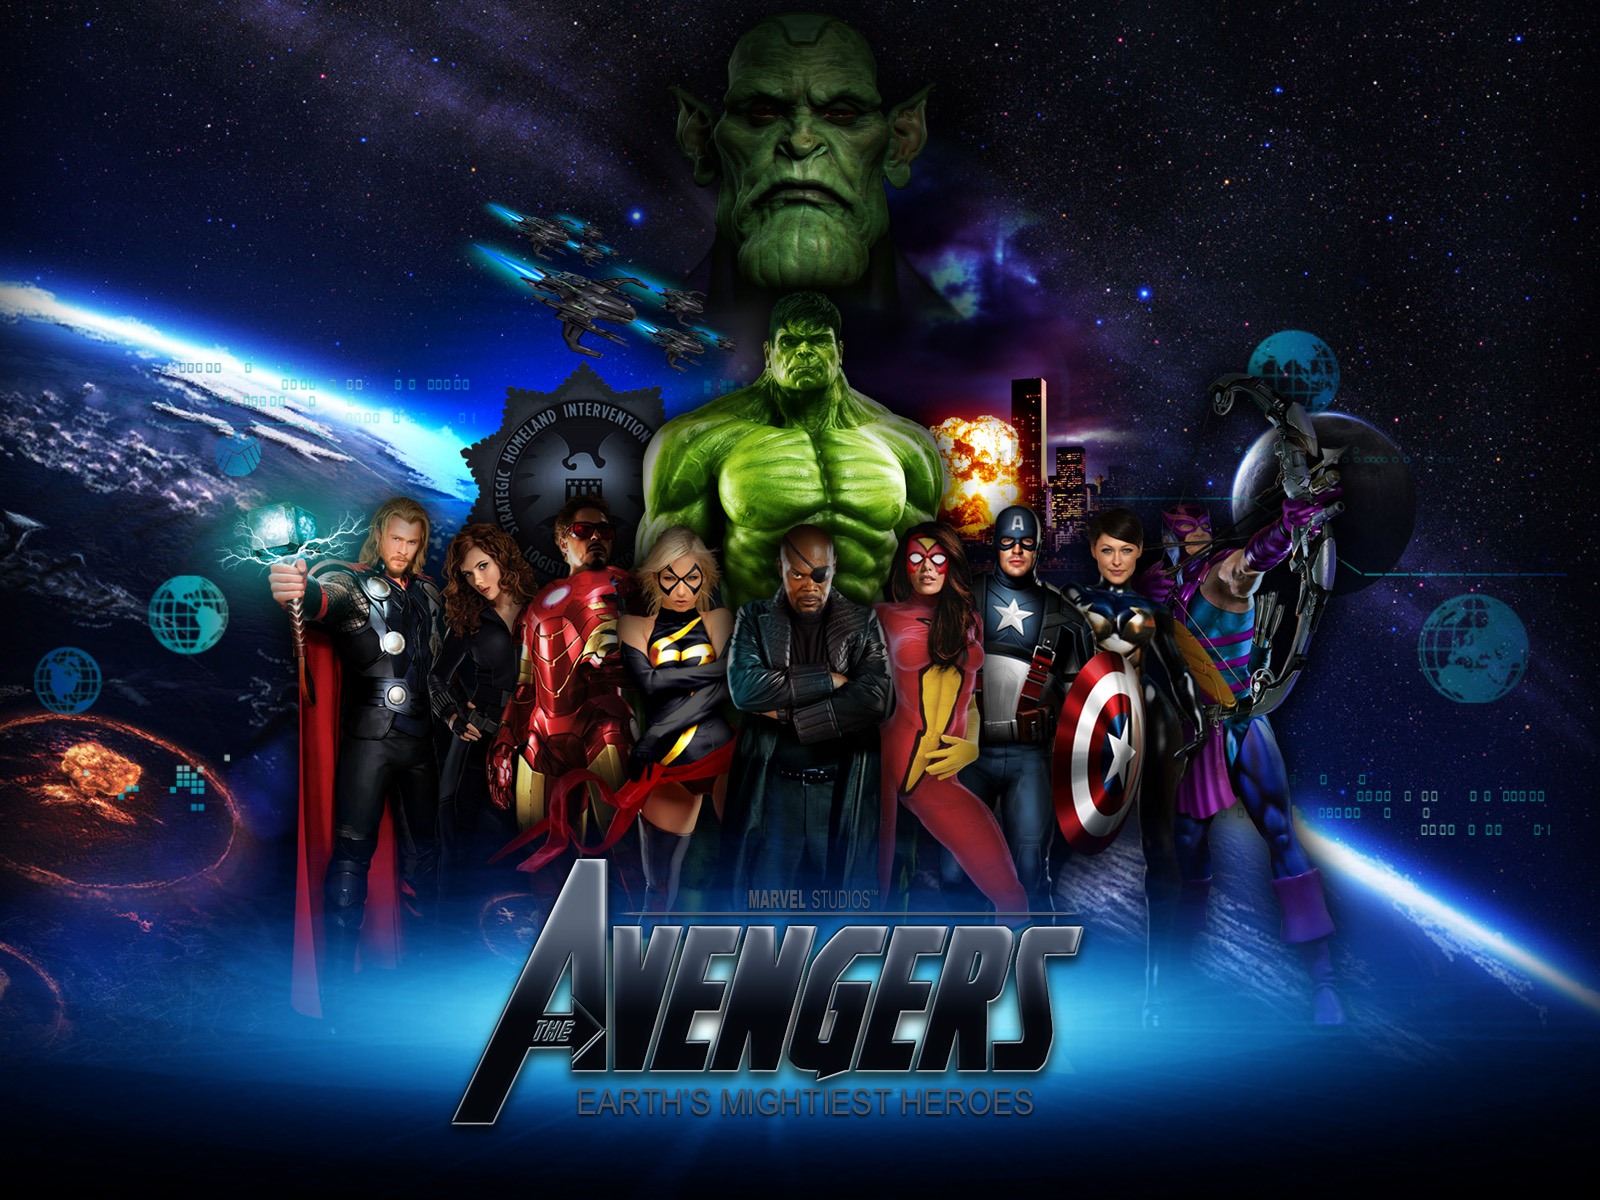 The Avengers 2012 HD wallpapers #12 - 1600x1200